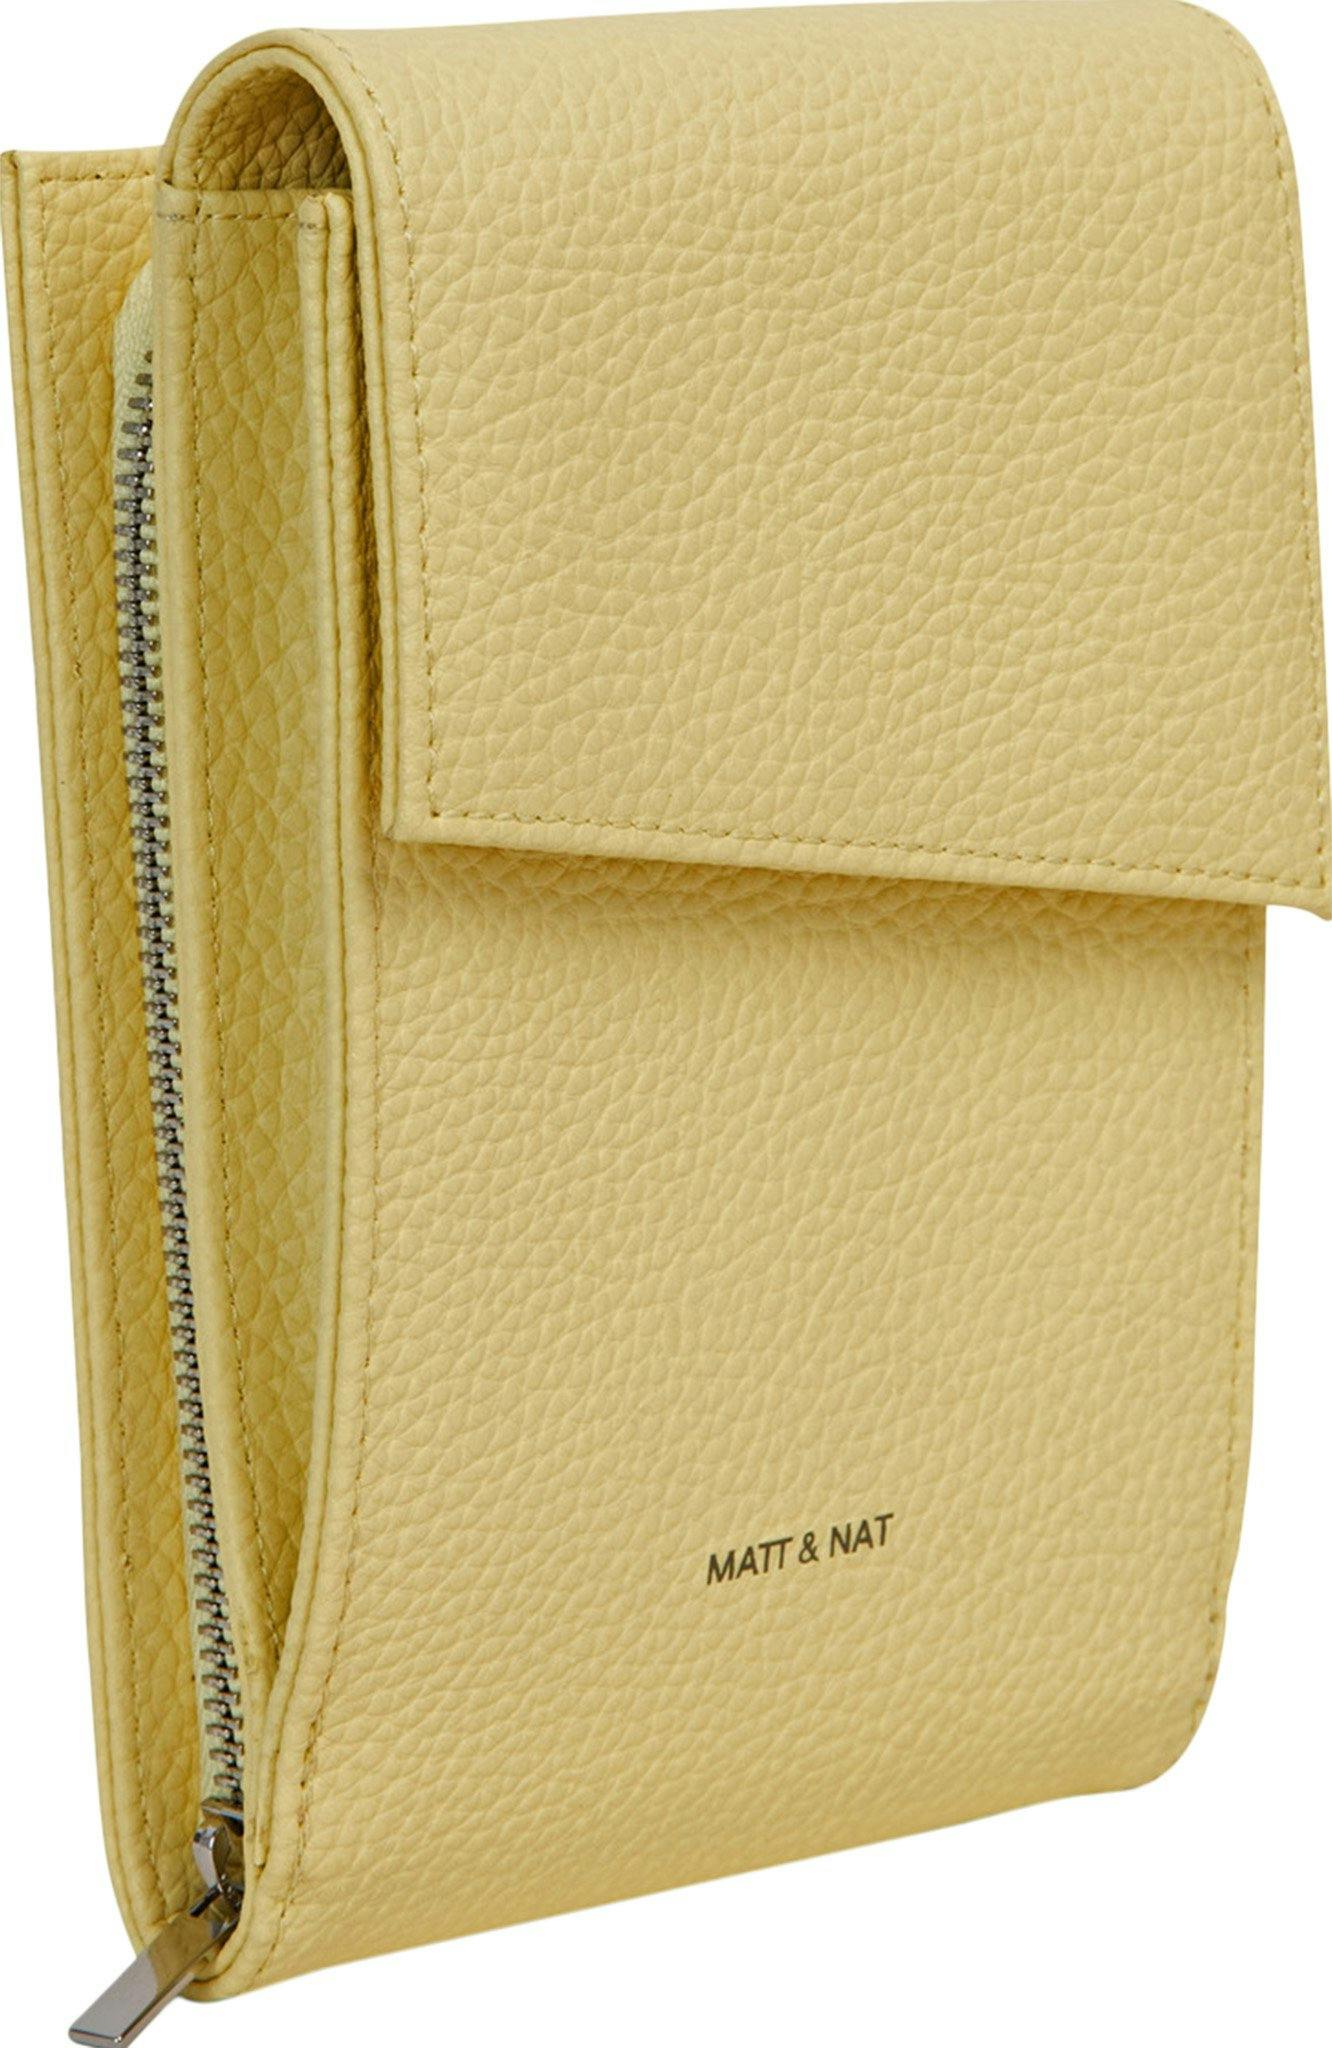 Product image for Met Wallet - Dwell Collection